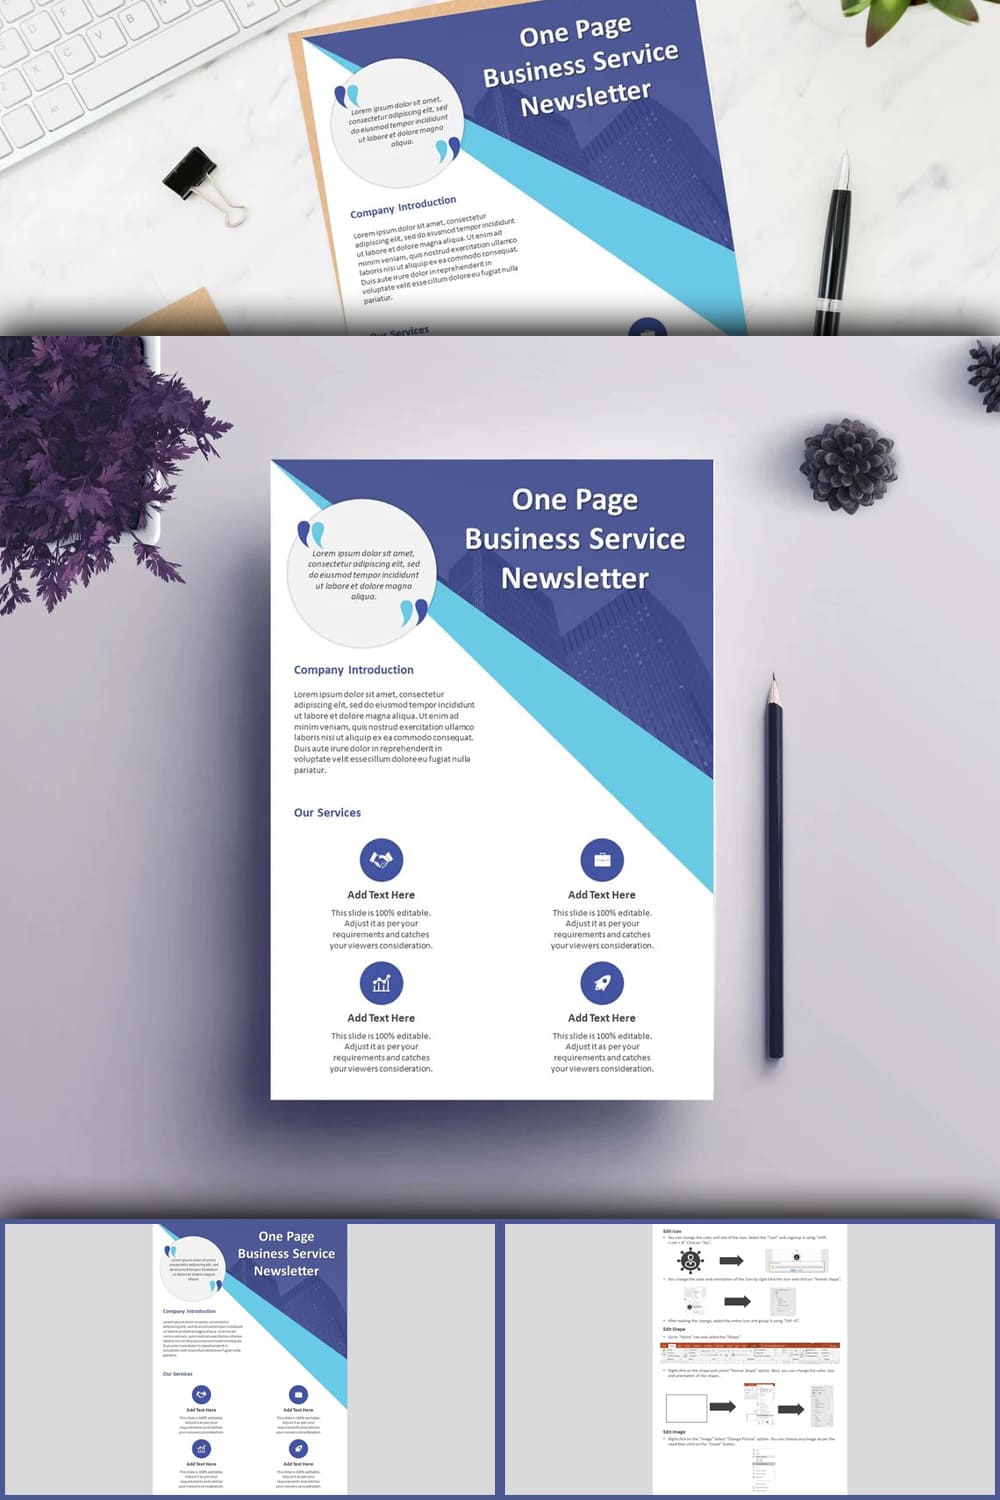 Image collection of amazing business service newsletter presentation slide template.